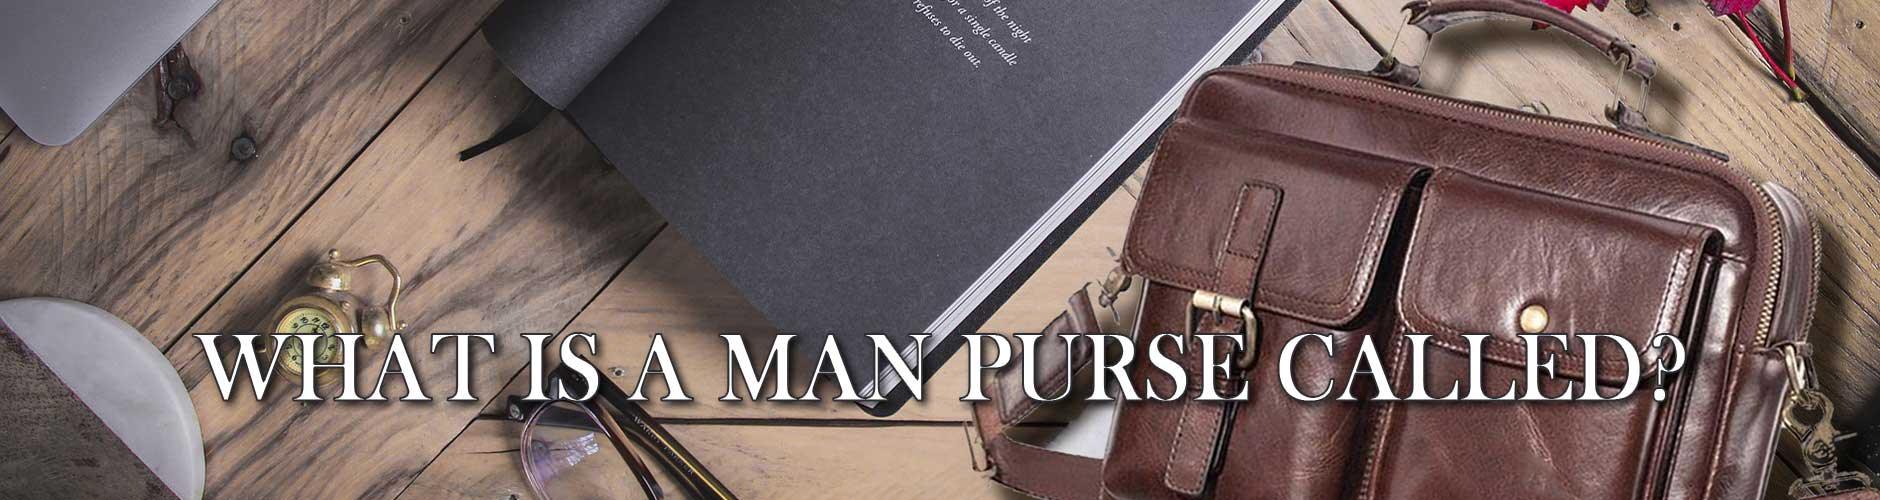 Amazon.com: Exception Goods Man Purse Crossbody Leather, Mens Shoulder Bag  Leather Messenger Bag For Men : Clothing, Shoes & Jewelry